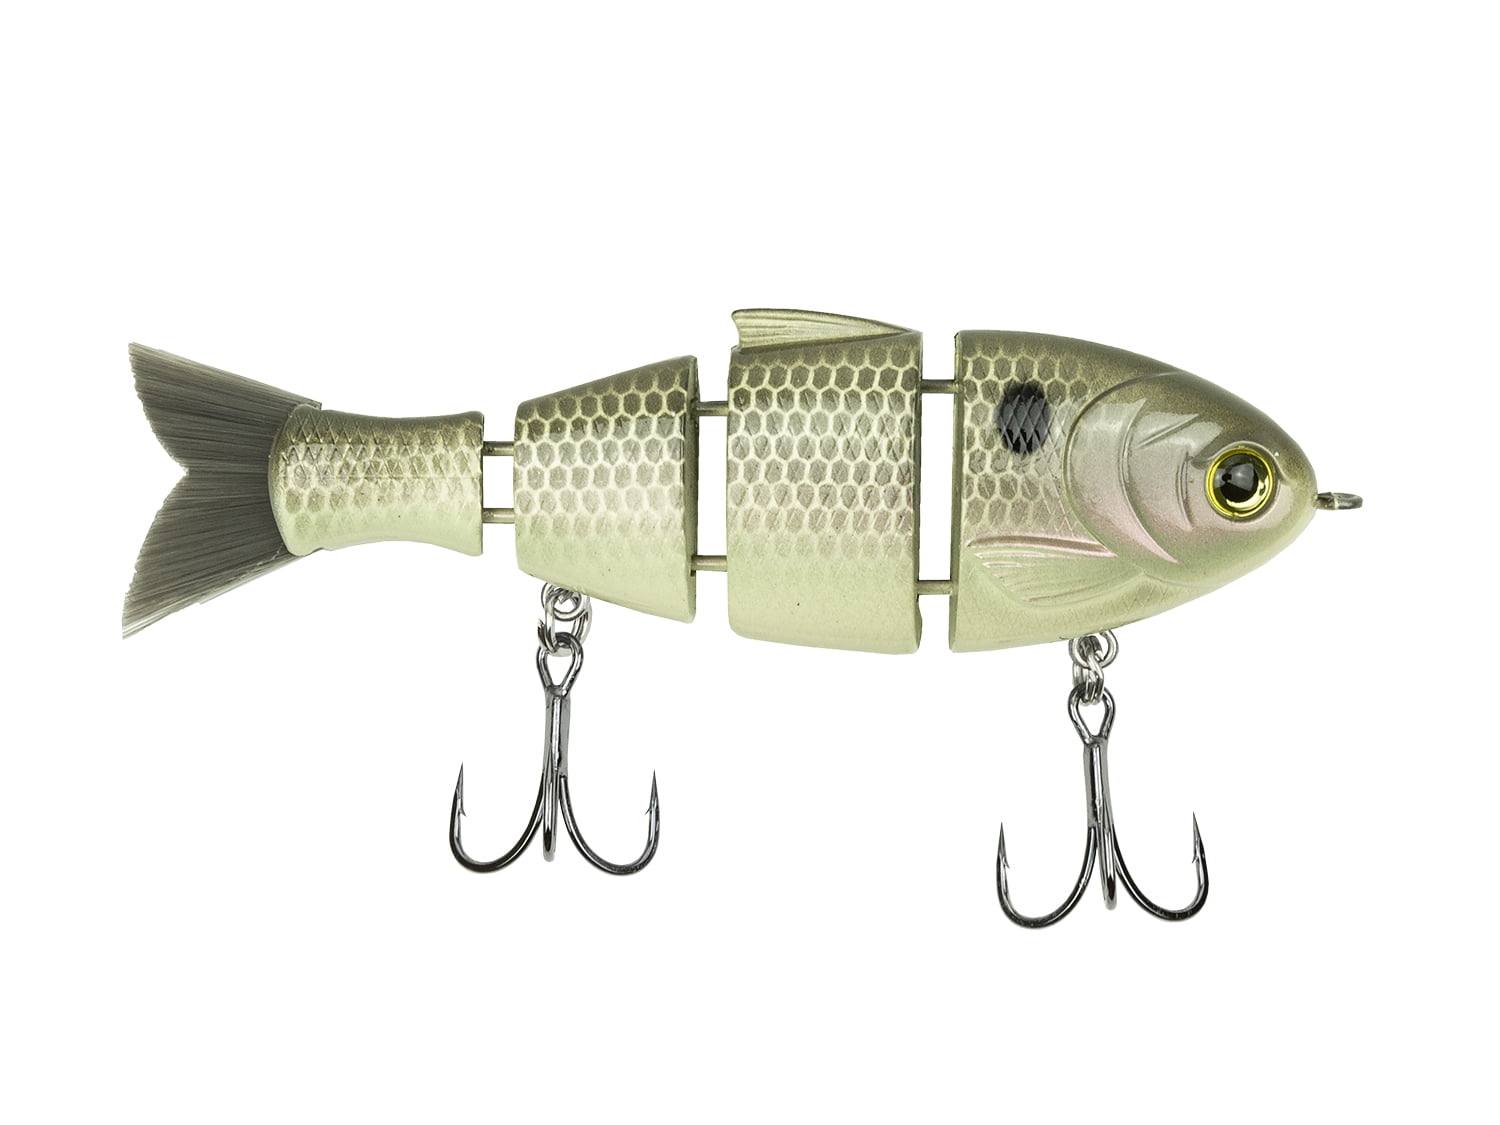 Catch Co Mike Bucca's Baby Bull Shad Swimbait Gizzard Shad